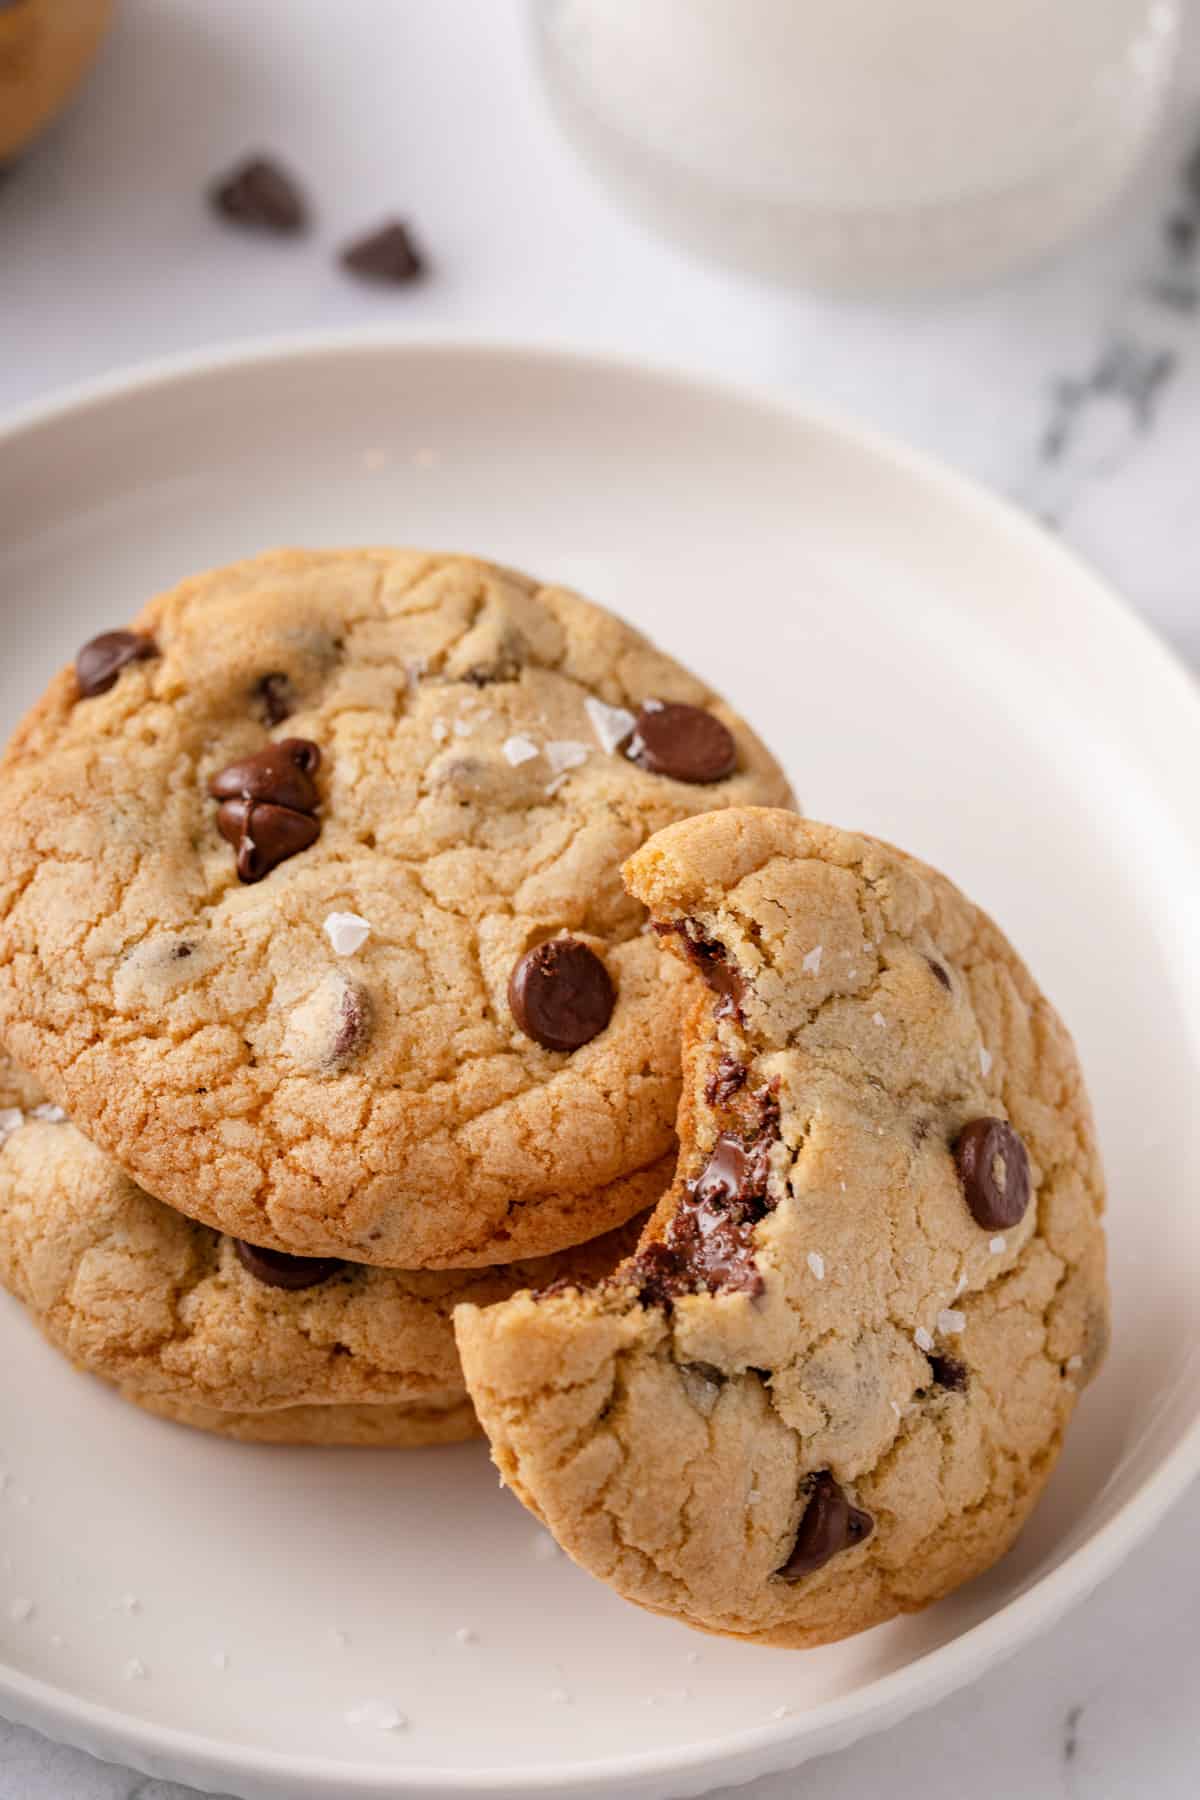 Three grand floridian chocolate chip cookies on a white plate. Two are stacked and the third has a bite taken from it and is leaning against the other two.